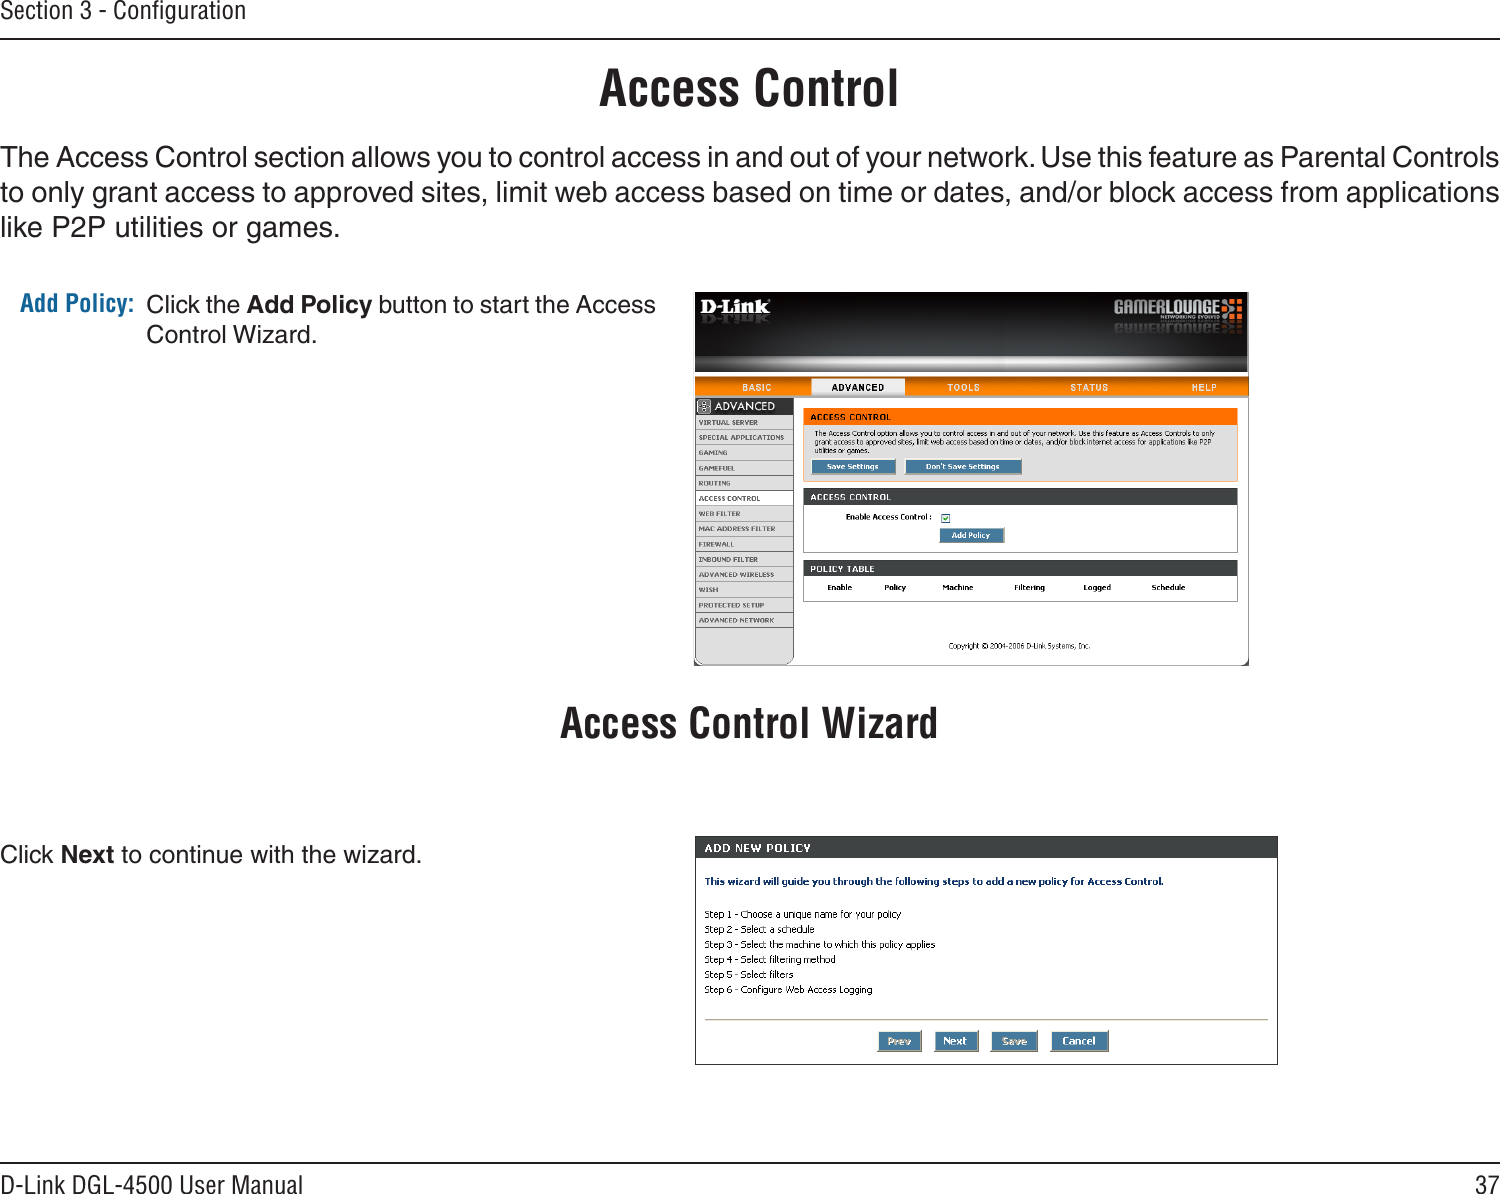 37D-Link DGL-4500 User ManualSection 3 - ConﬁgurationAccess ControlClick the Add Policy button to start the Access Control Wizard. Add Policy:The Access Control section allows you to control access in and out of your network. Use this feature as Parental Controls to only grant access to approved sites, limit web access based on time or dates, and/or block access from applications like P2P utilities or games.Click Next to continue with the wizard.Access Control Wizard